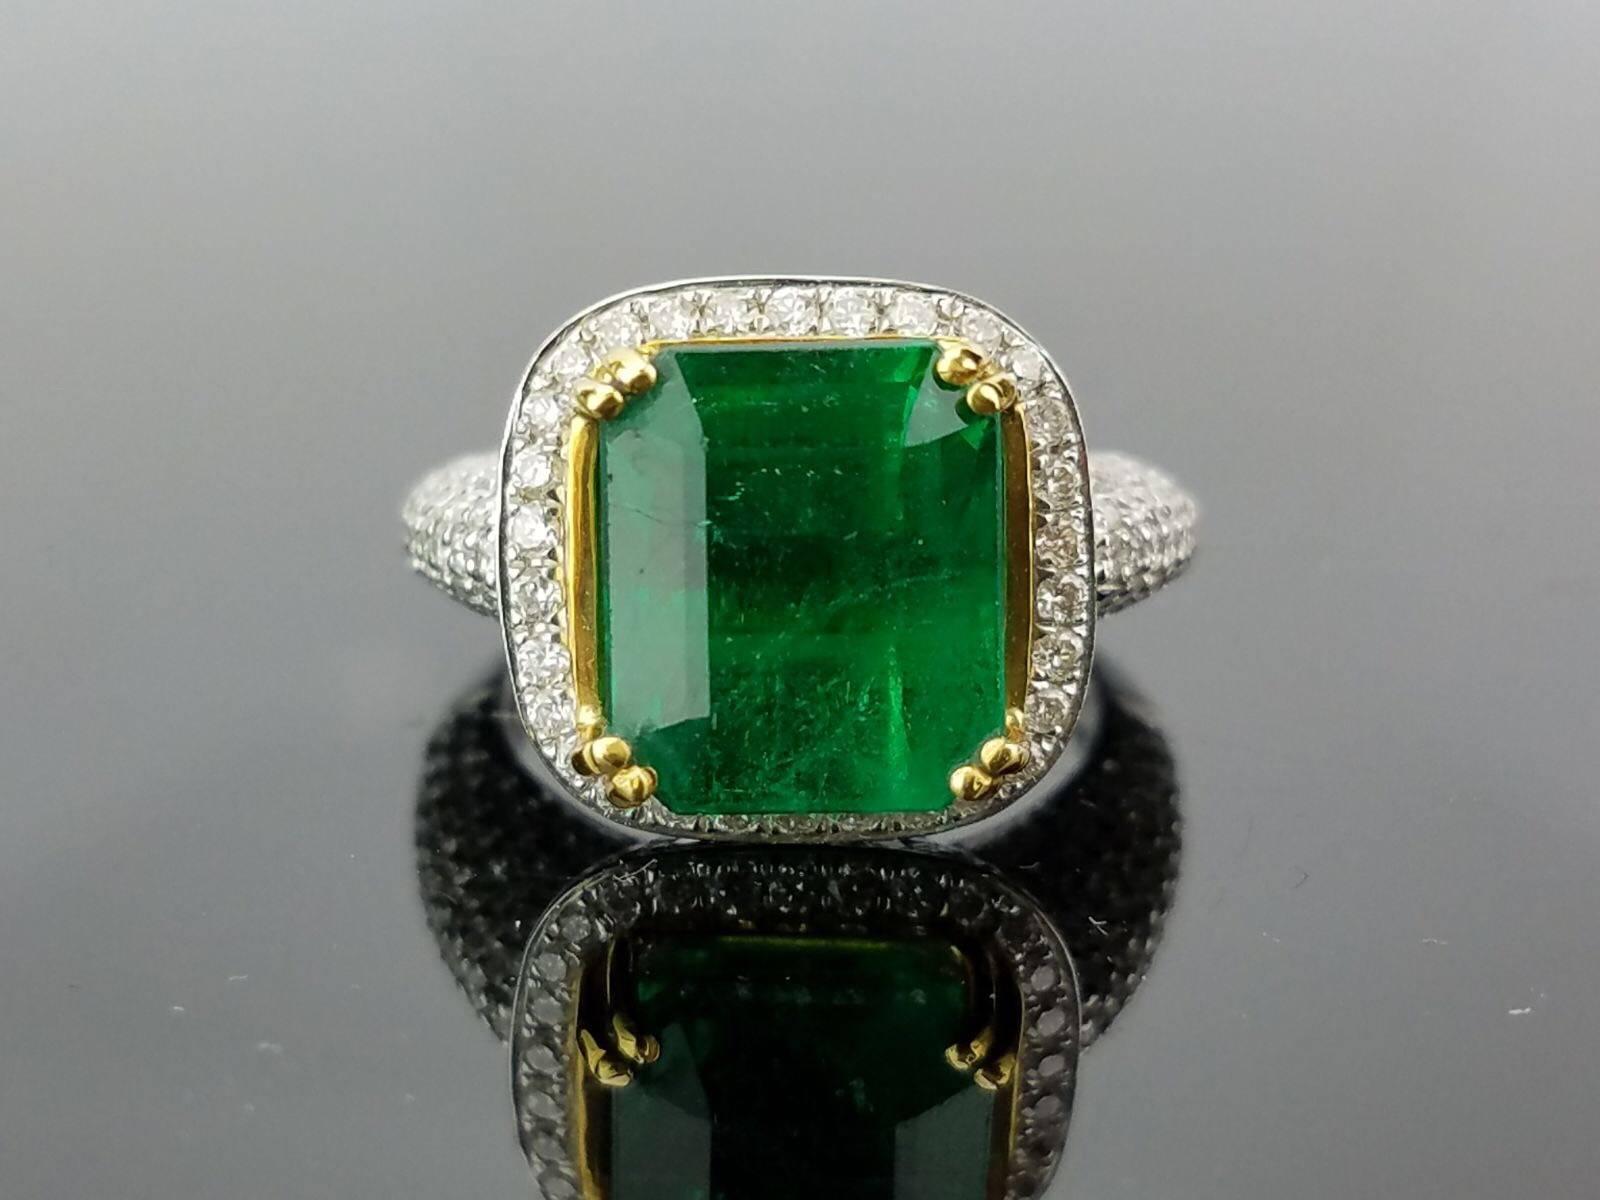 A classic cocktail ring, with a lustrous emerald cut Zambian emerald  sorrounded with White Diamonds, all set 18K white gold. 

Stone Details: 
Stone: Emerald
Carat Weight: 6.24 Carat

Diamond Details:
Total Carat Weight: 1.73 carat
Quality: VS/SI ,